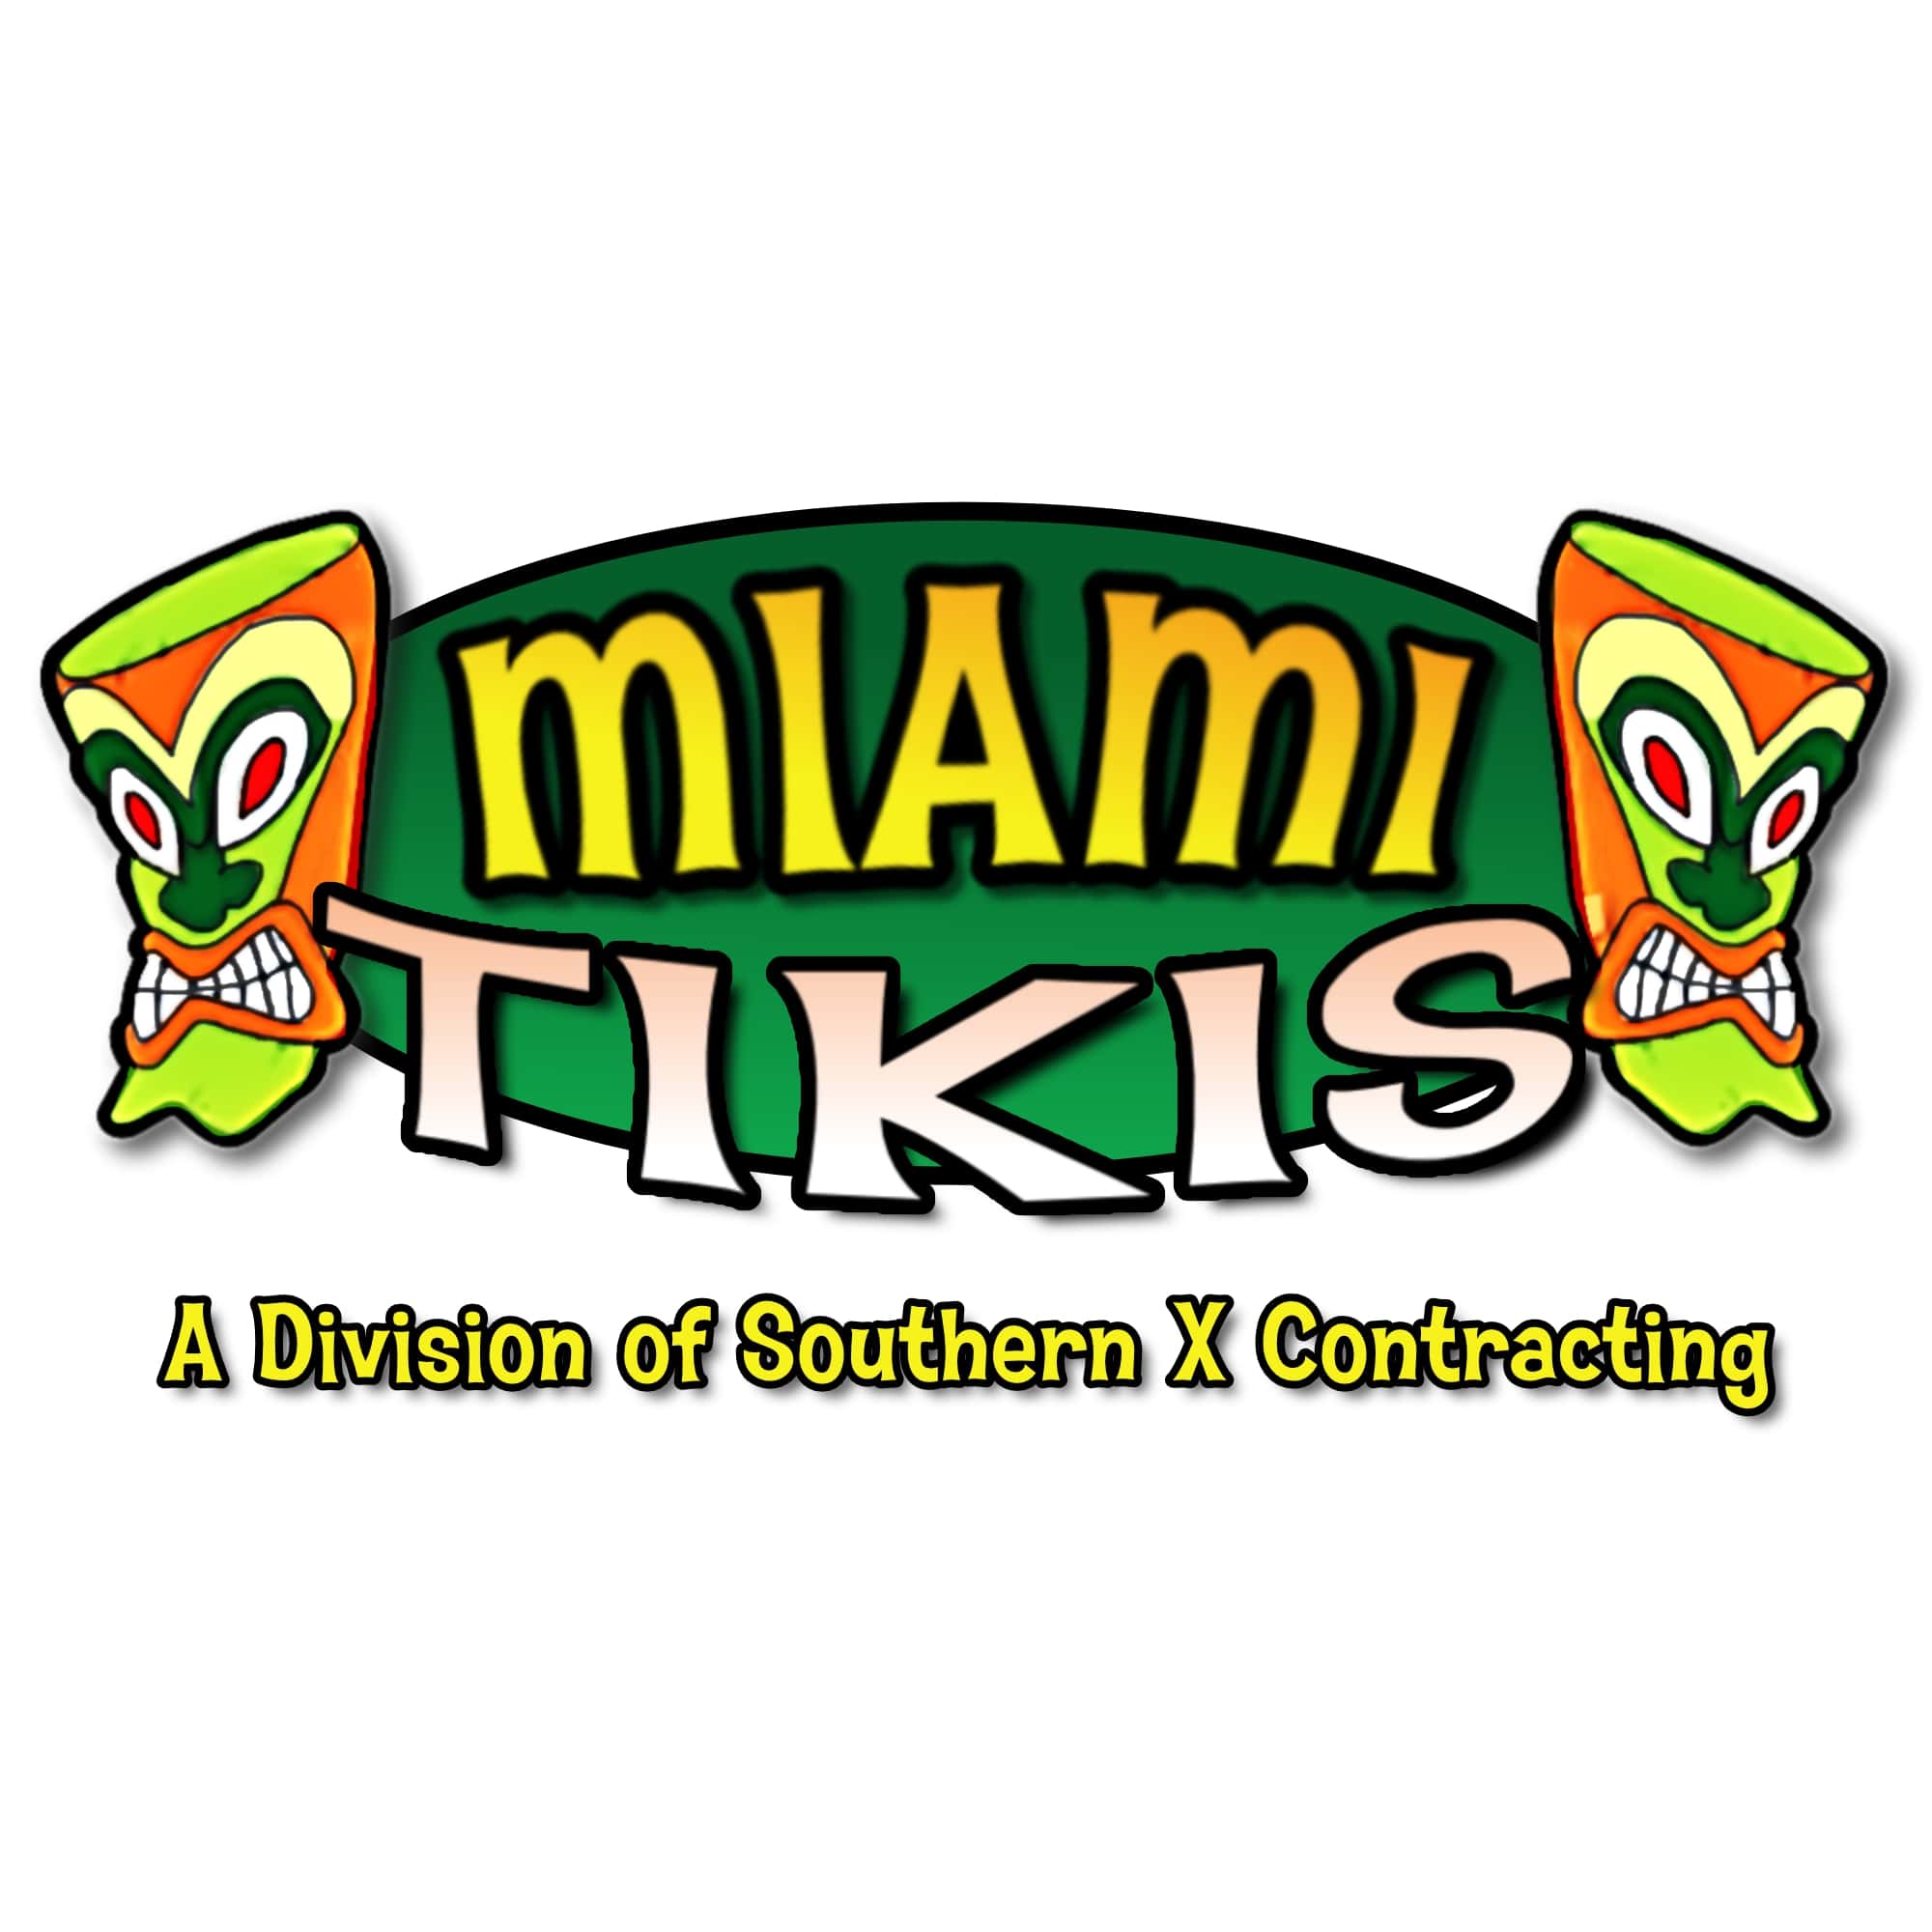 Miami Tiki Hut Builders a Division of Southern X Contracting's Logo